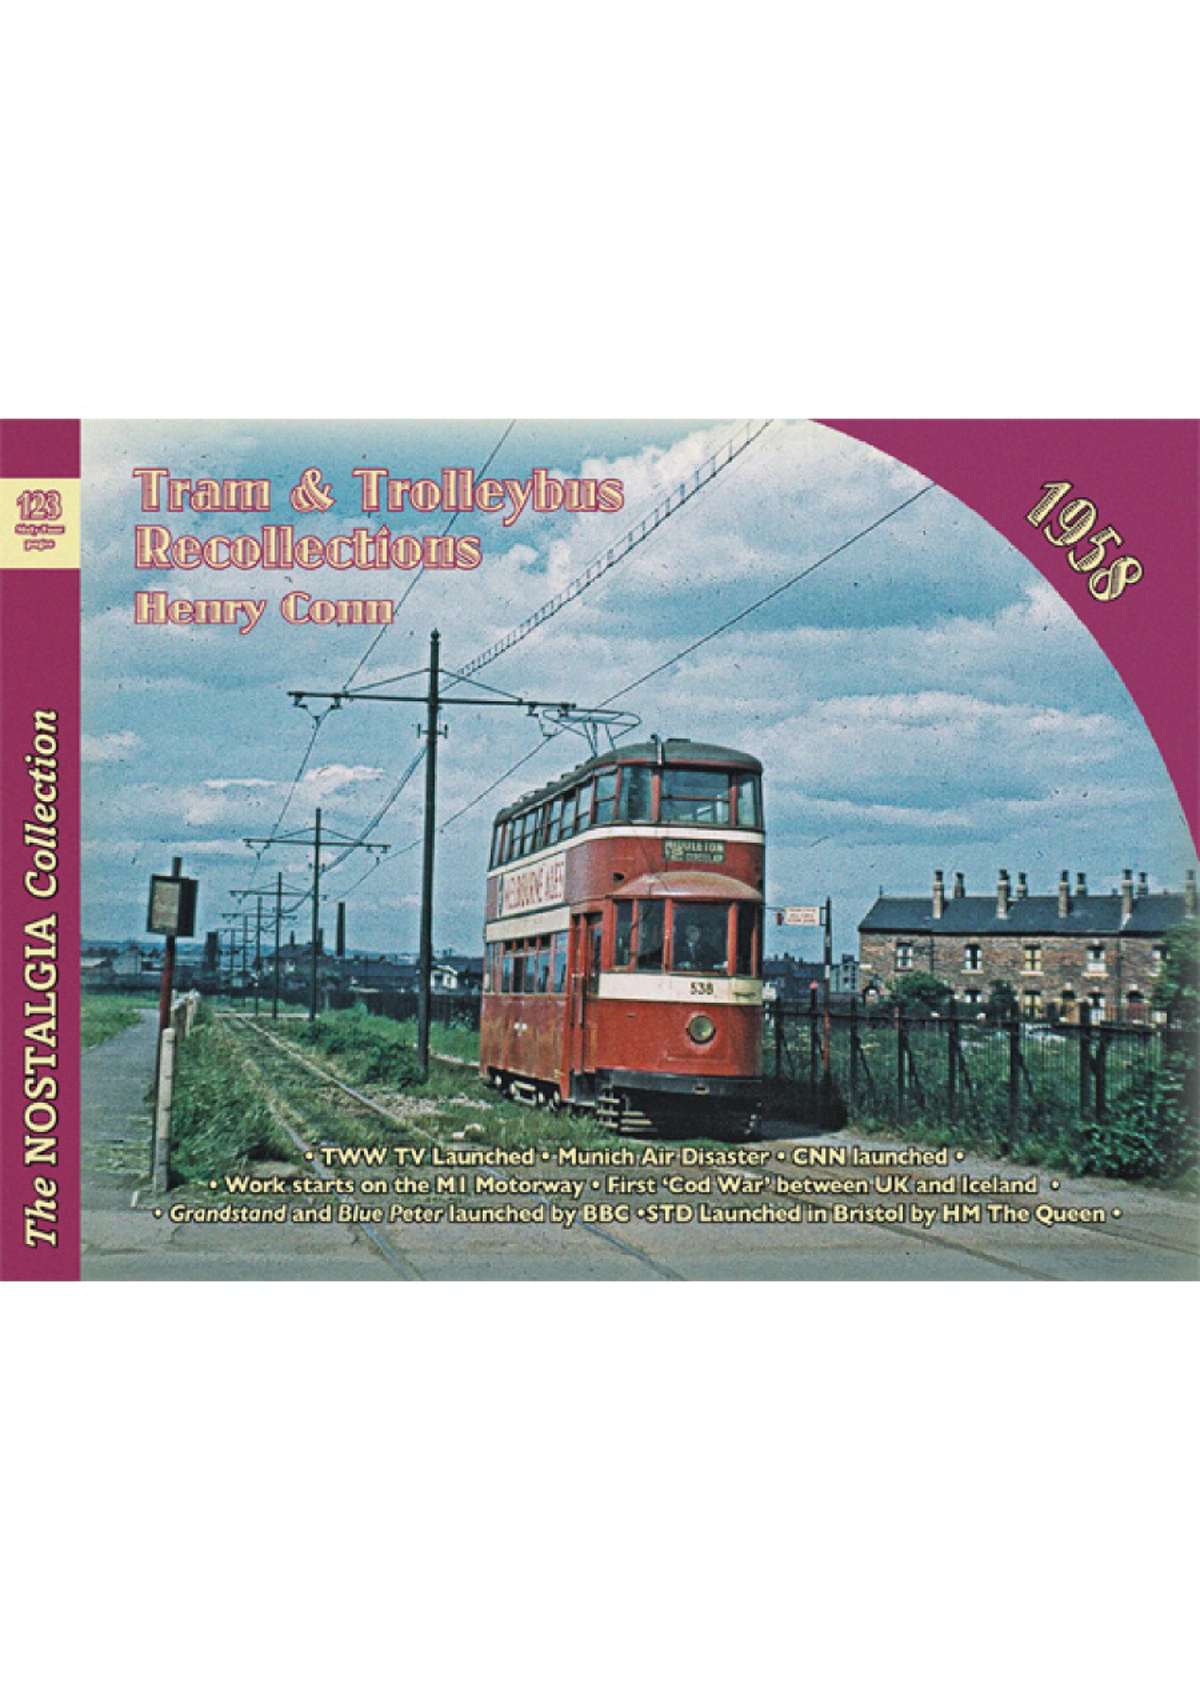 5843 - Tram & Trolleybus Recollections 1958